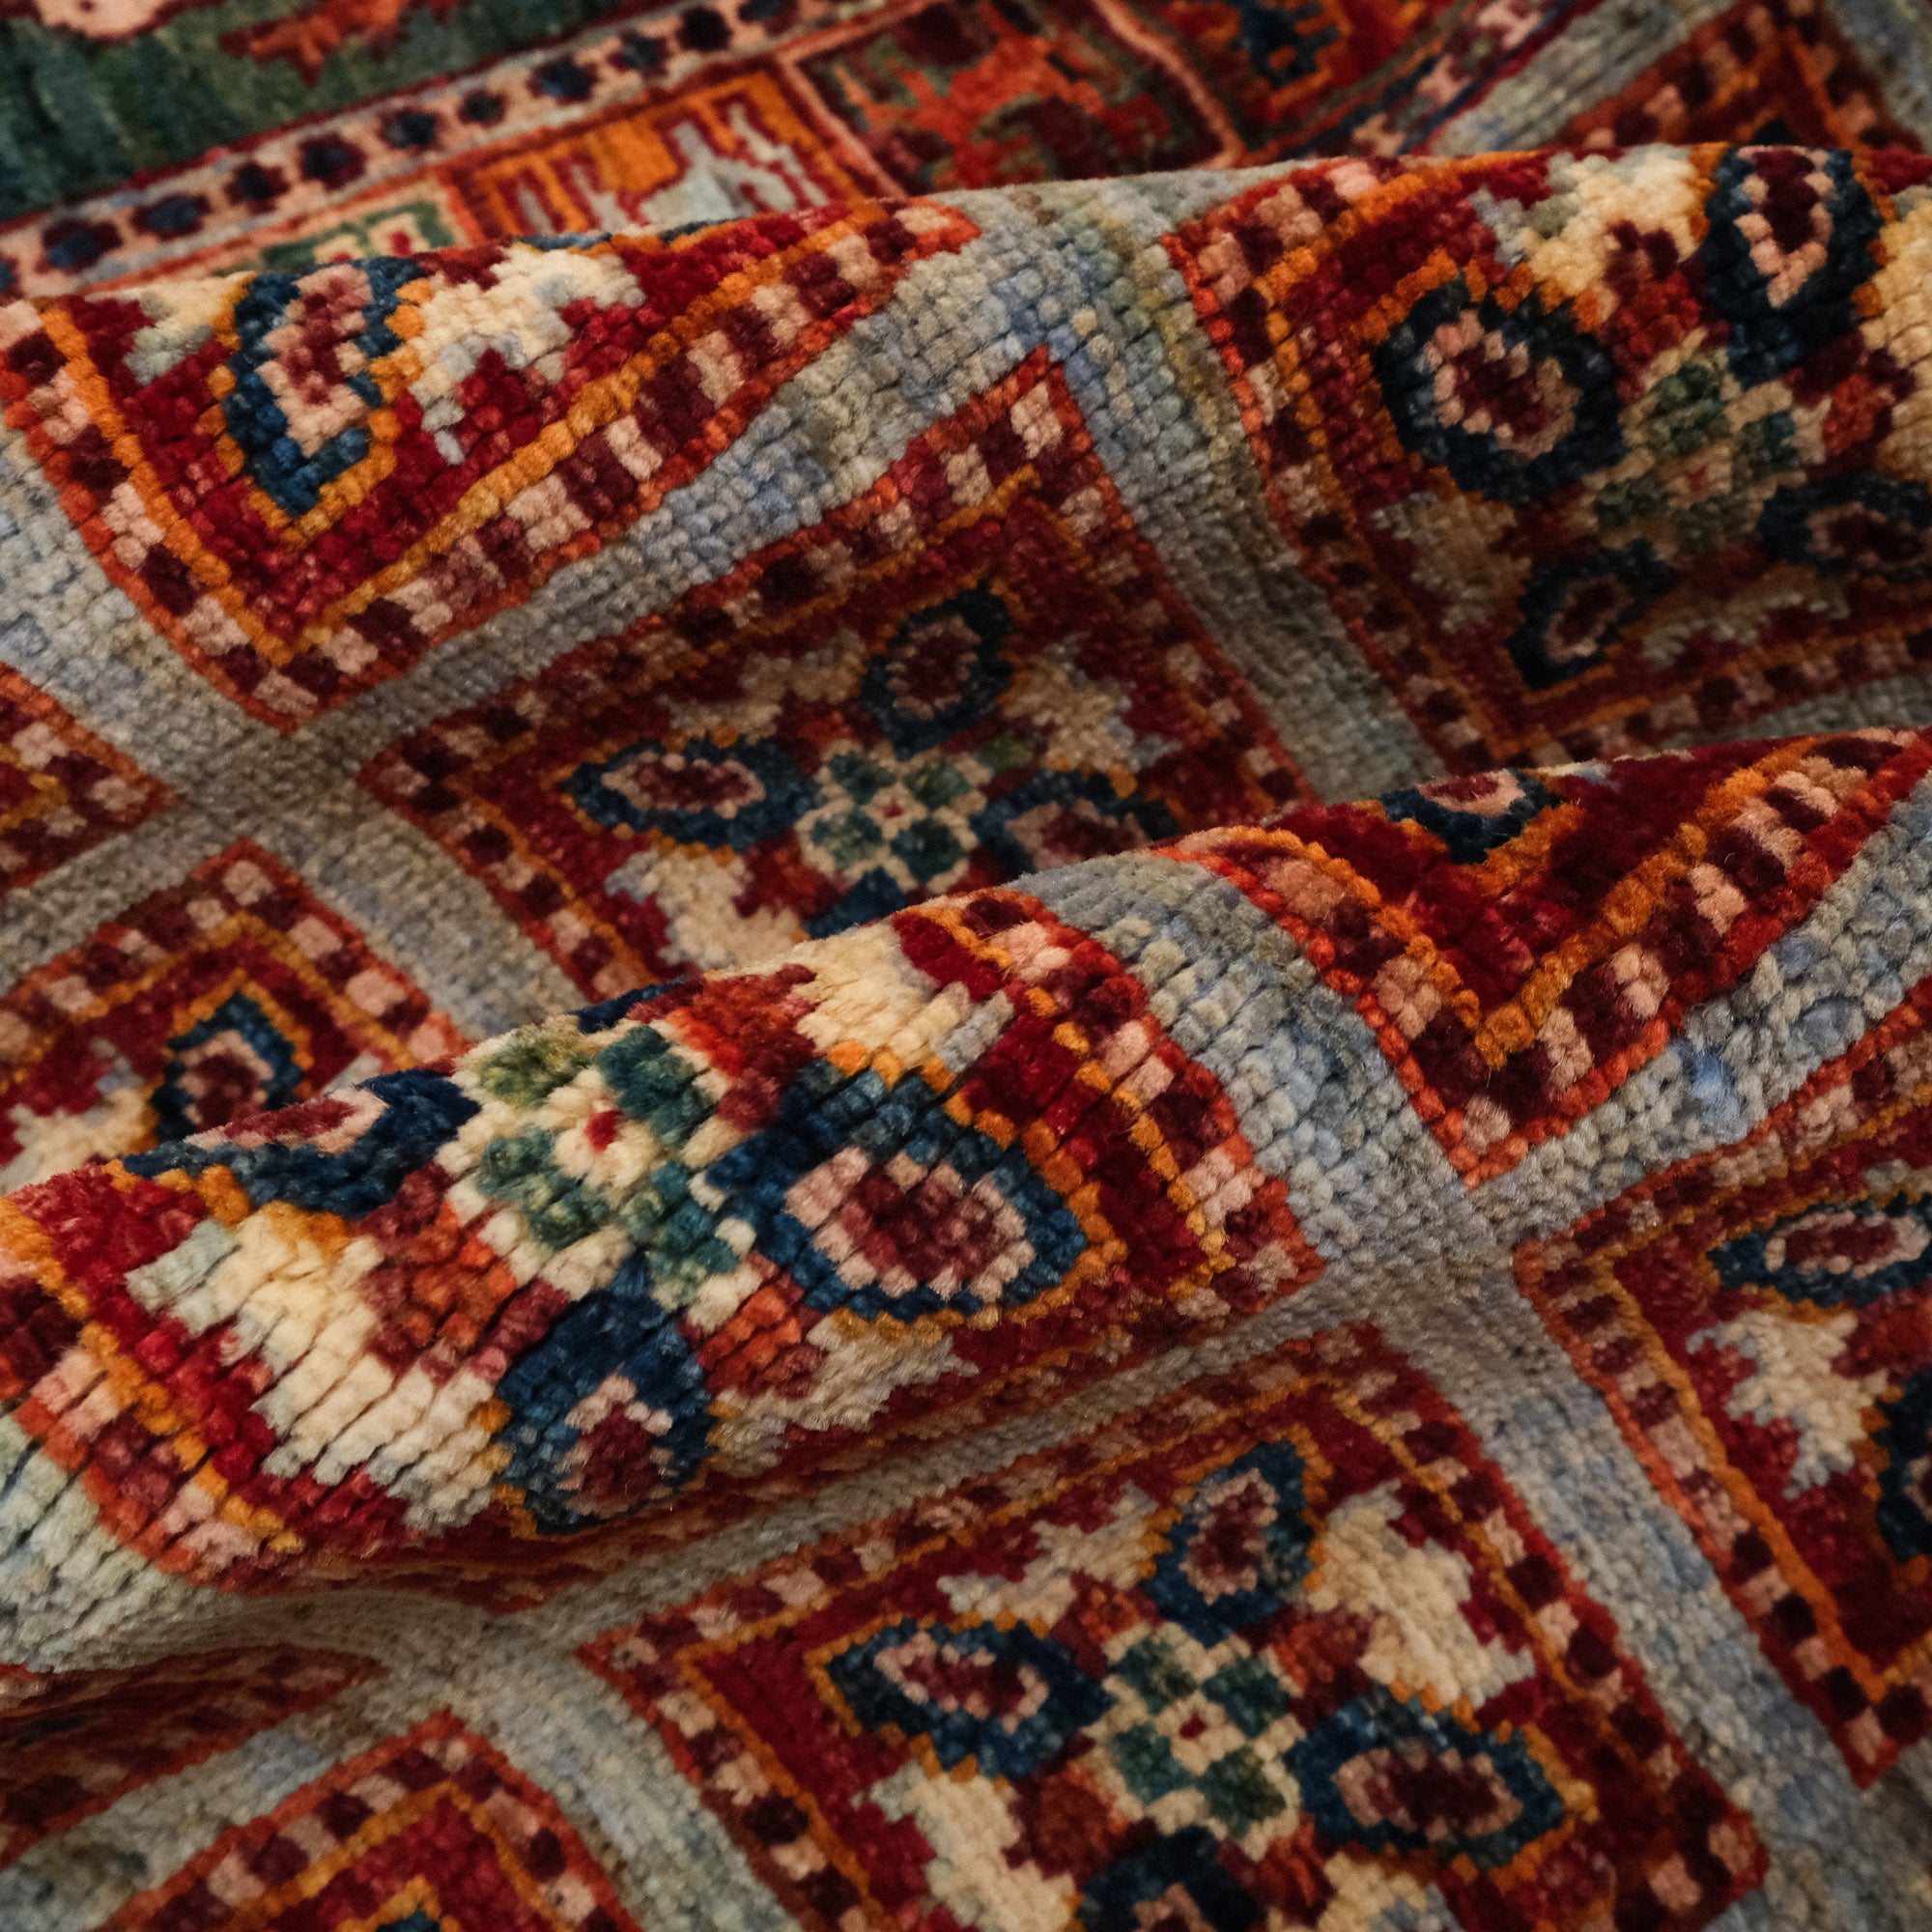 Şahzade Series Hand-Woven Pazyryk Patterned Colorful Wool Carpet